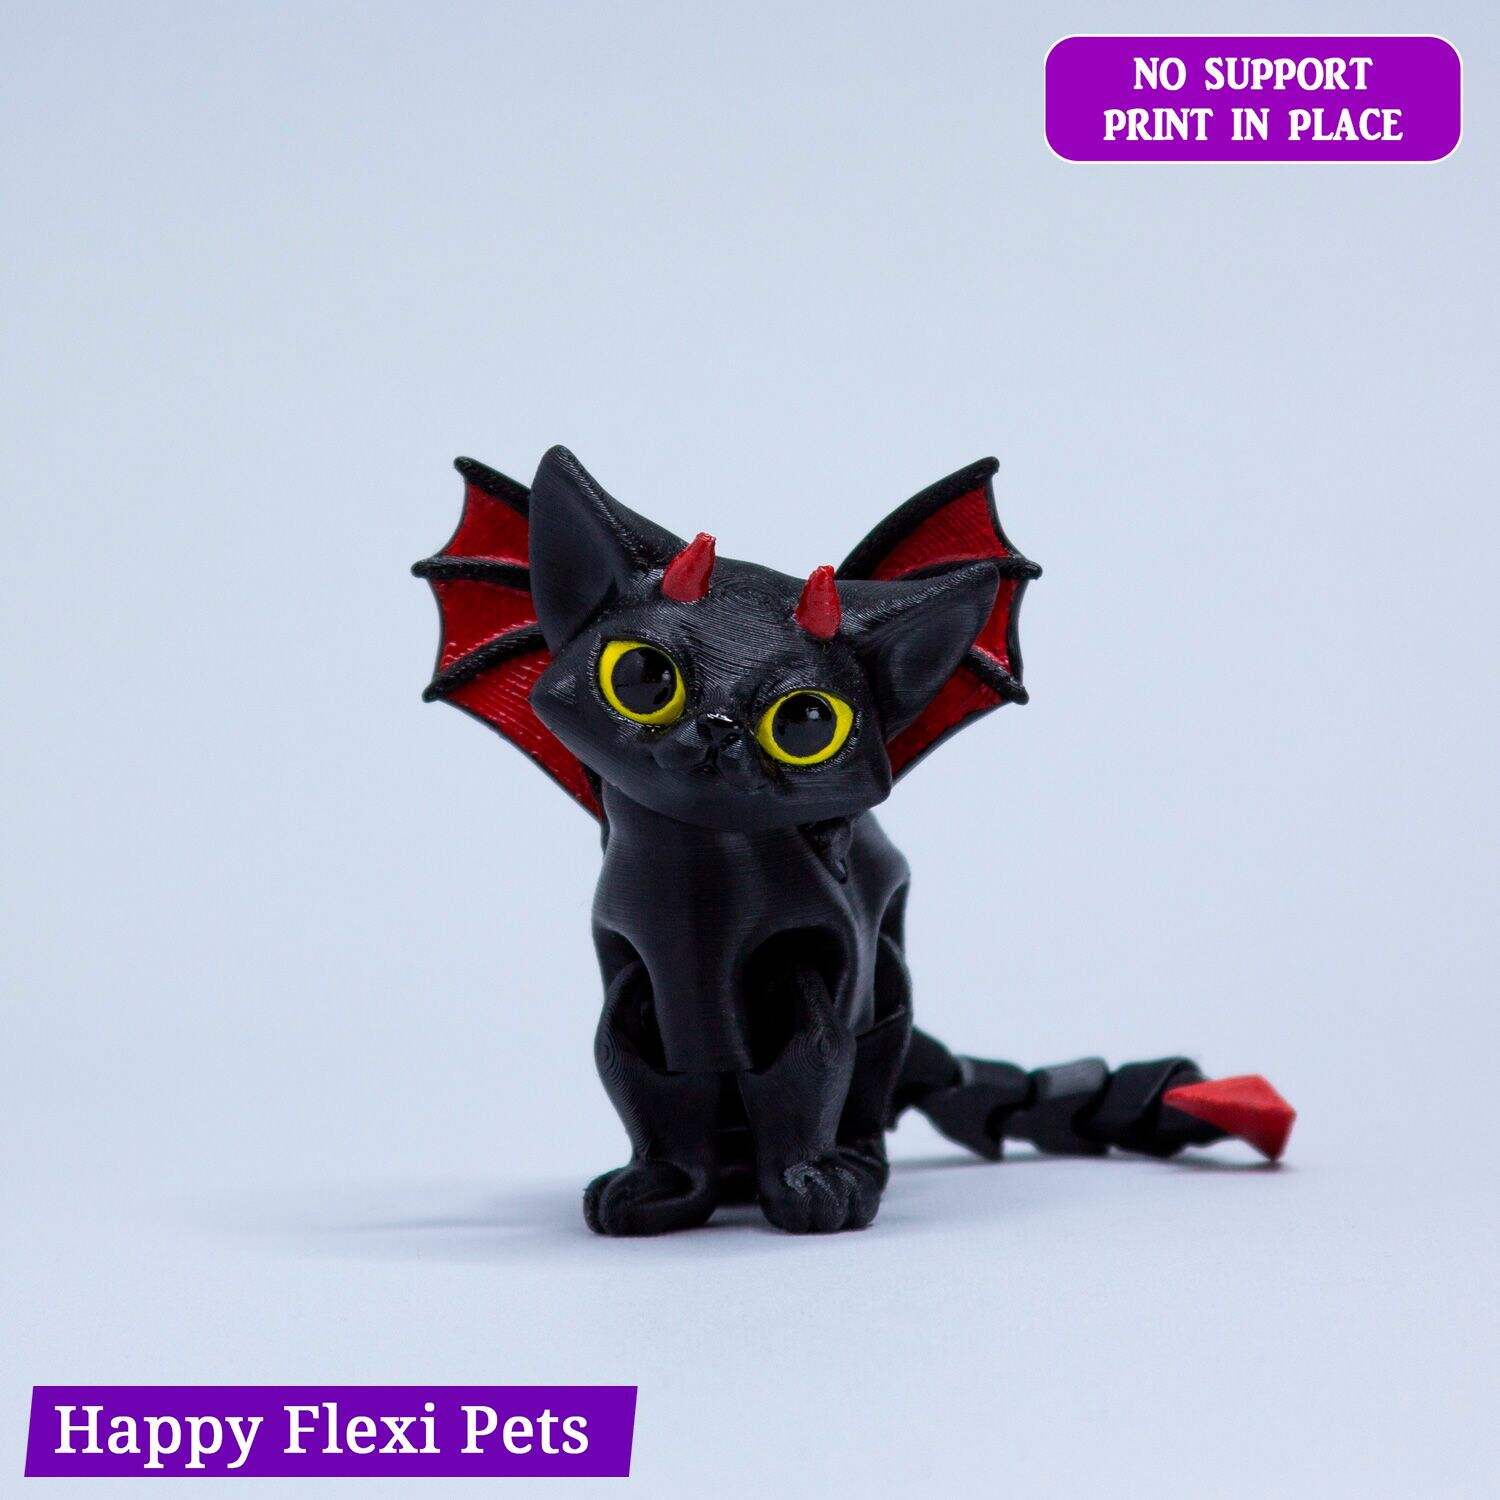 Malacoda the demon cat - articulated toy by Happy Flexi pets